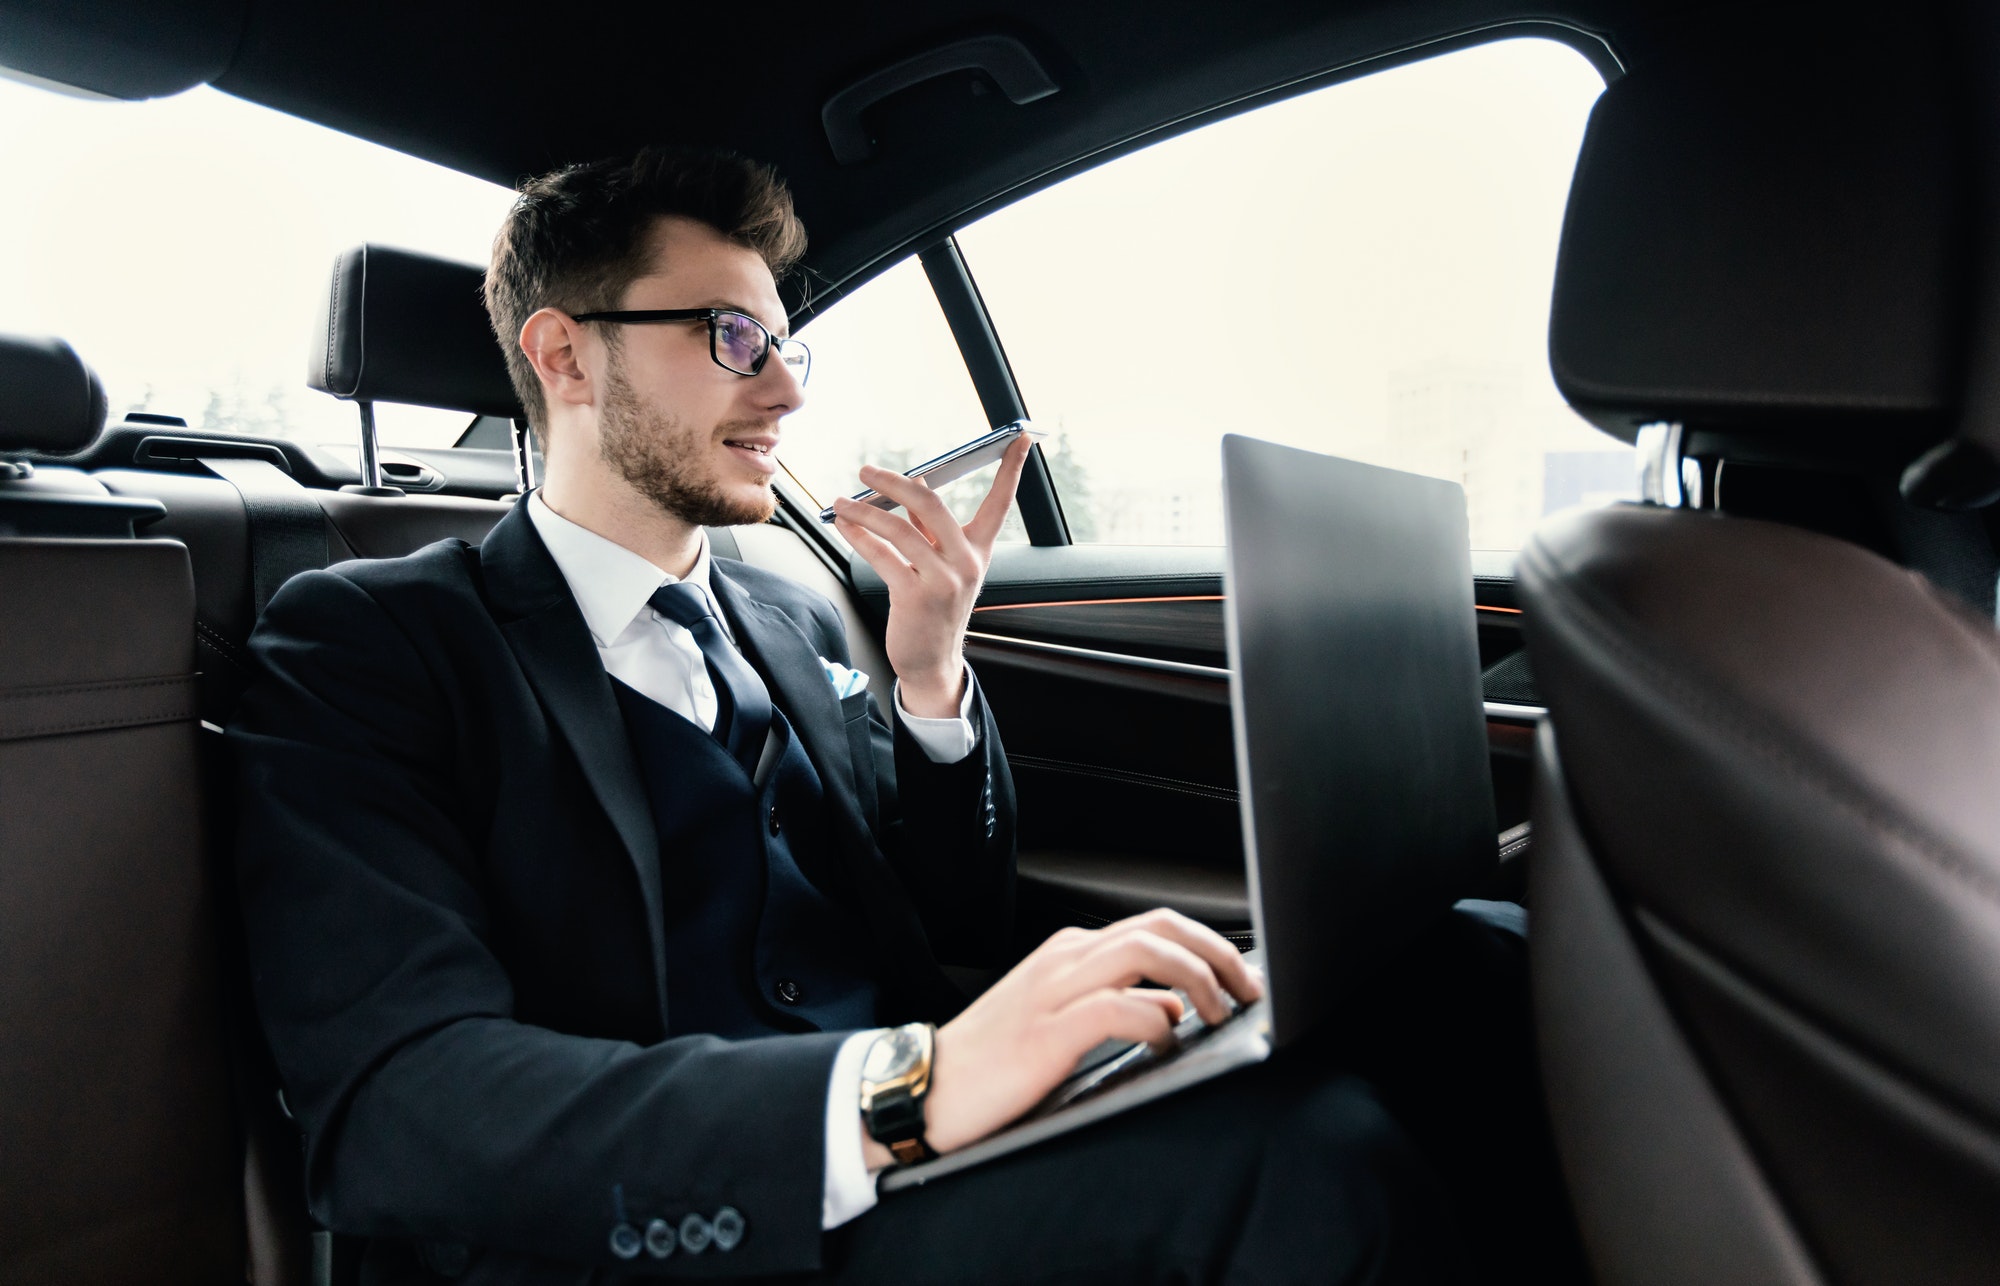 Young businessman talking on phone in taxi